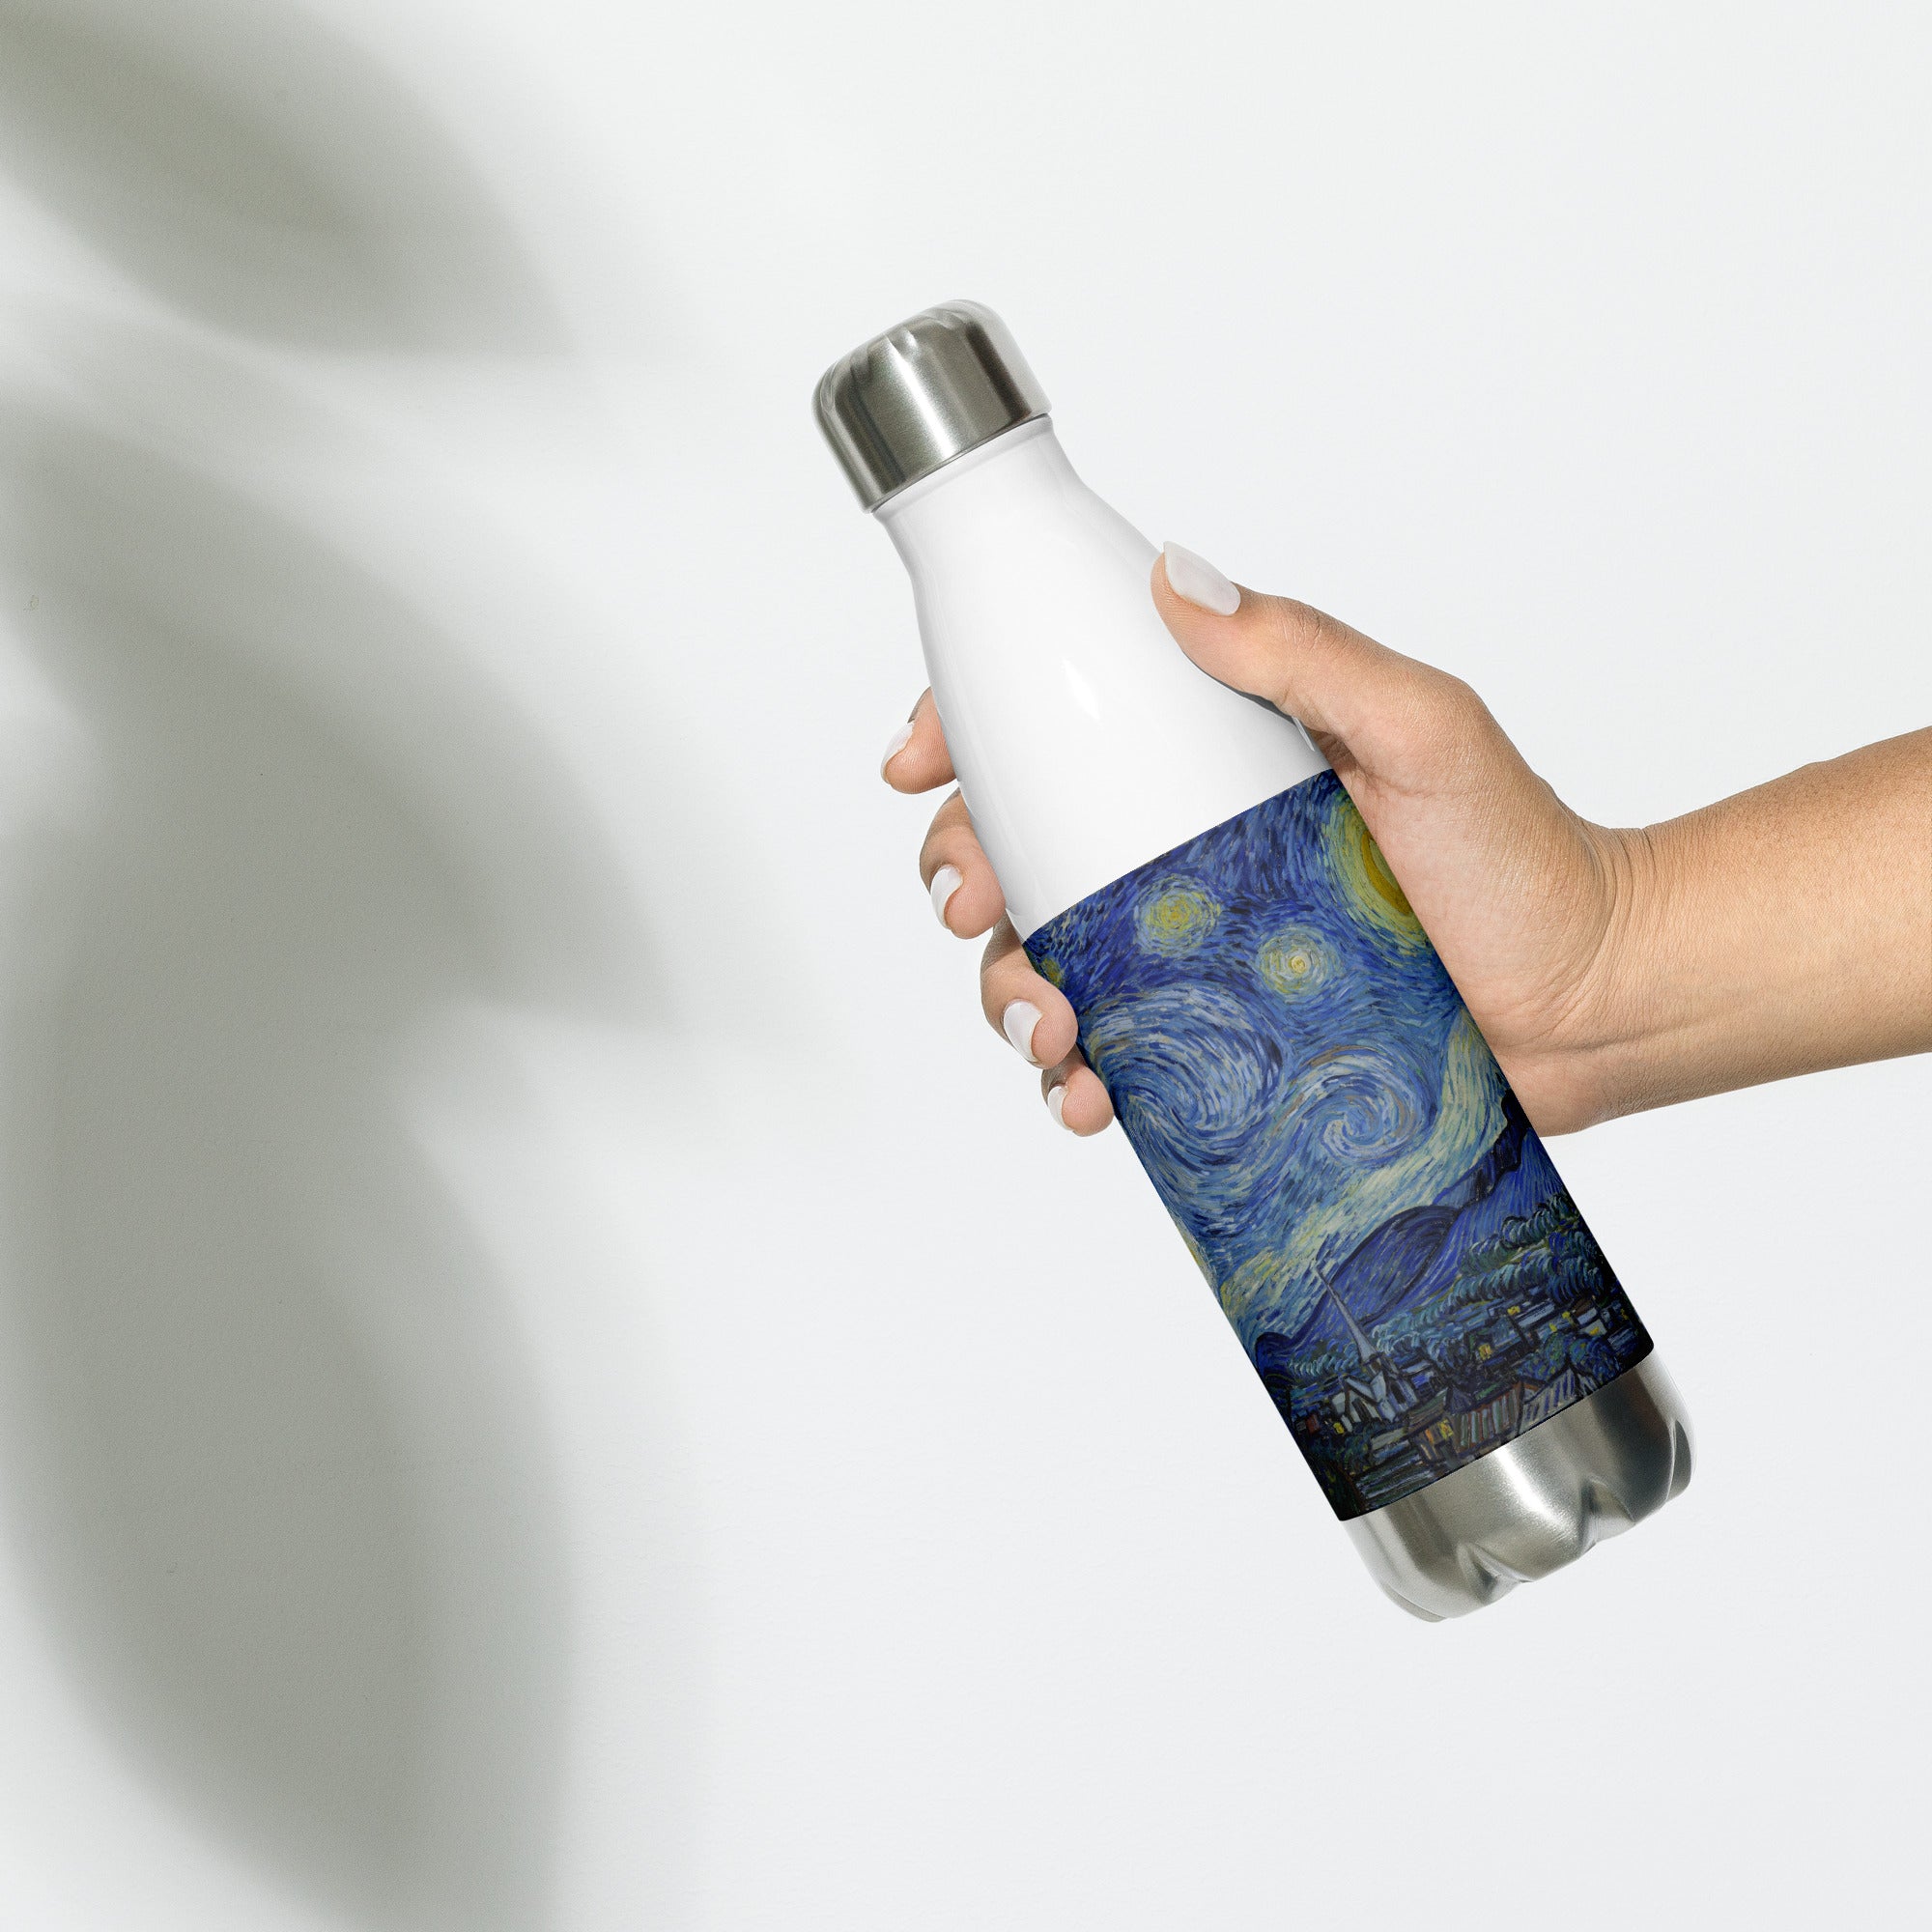 Vincent van Gogh 'Starry Night' Famous Painting Water Bottle | Stainless Steel Art Water Bottle